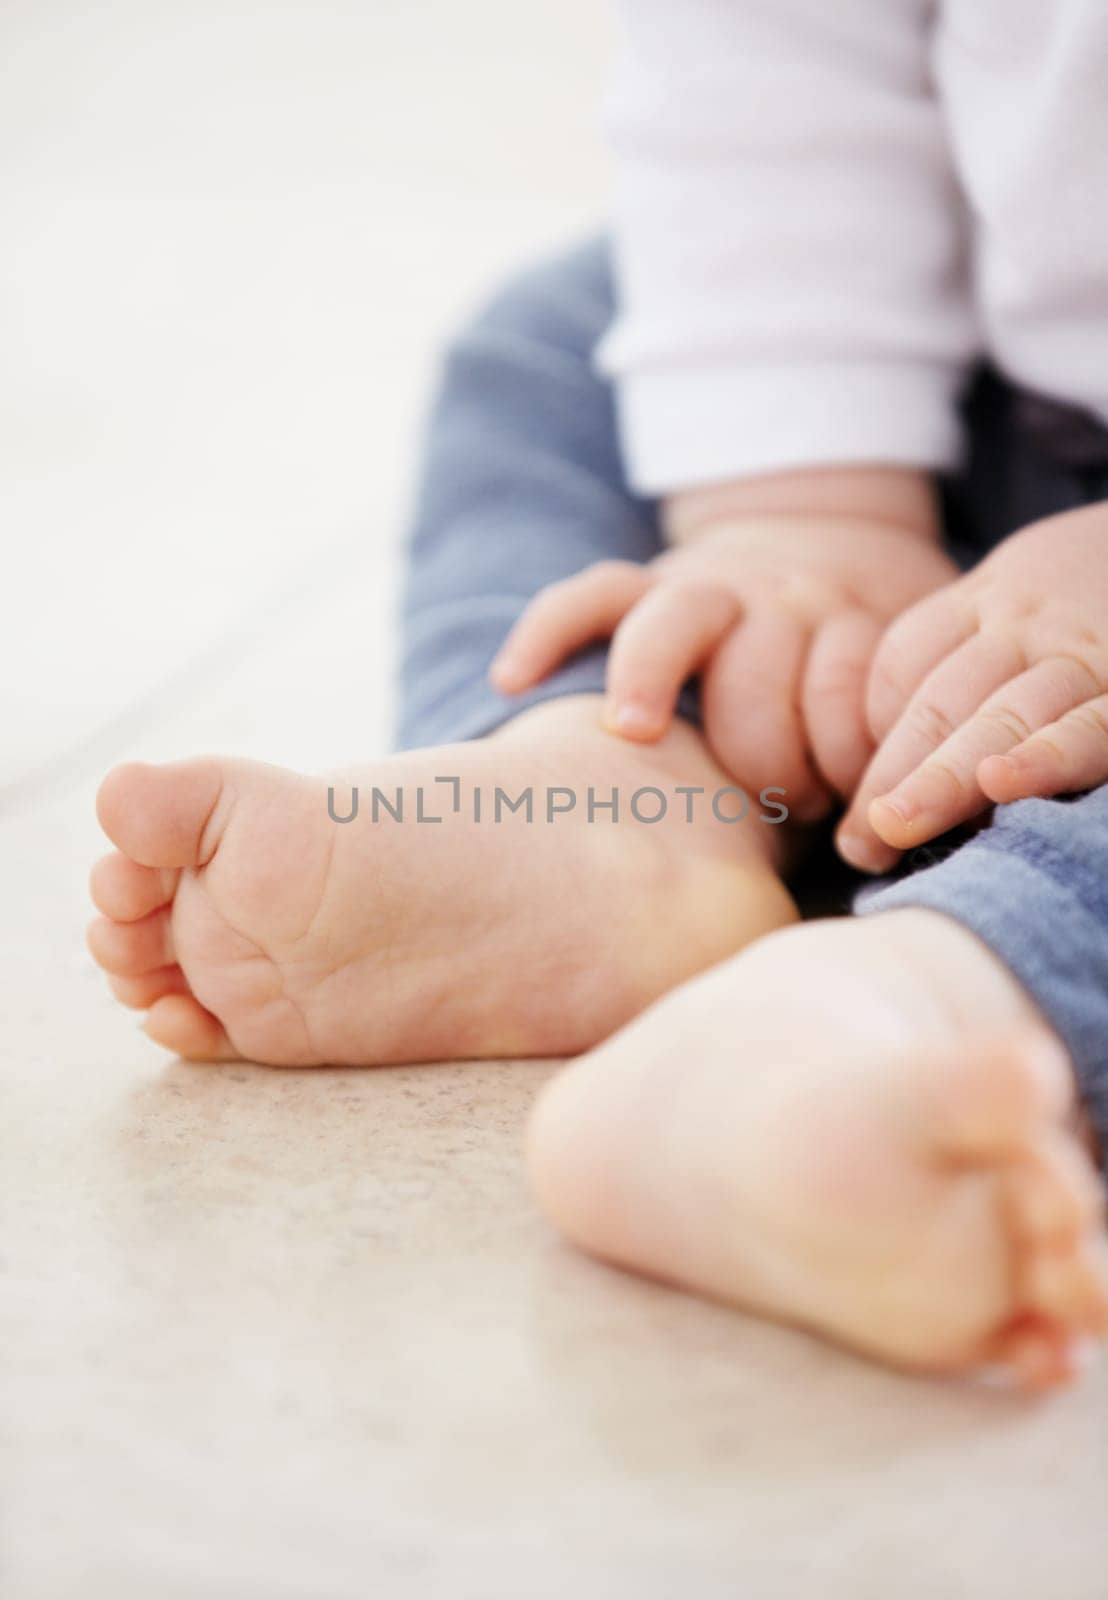 Closeup, feet and baby on floor in home for child development, health and growth. Family, youth and adorable toes and hands of young infant in living room for wellness, learning to crawl and relax.